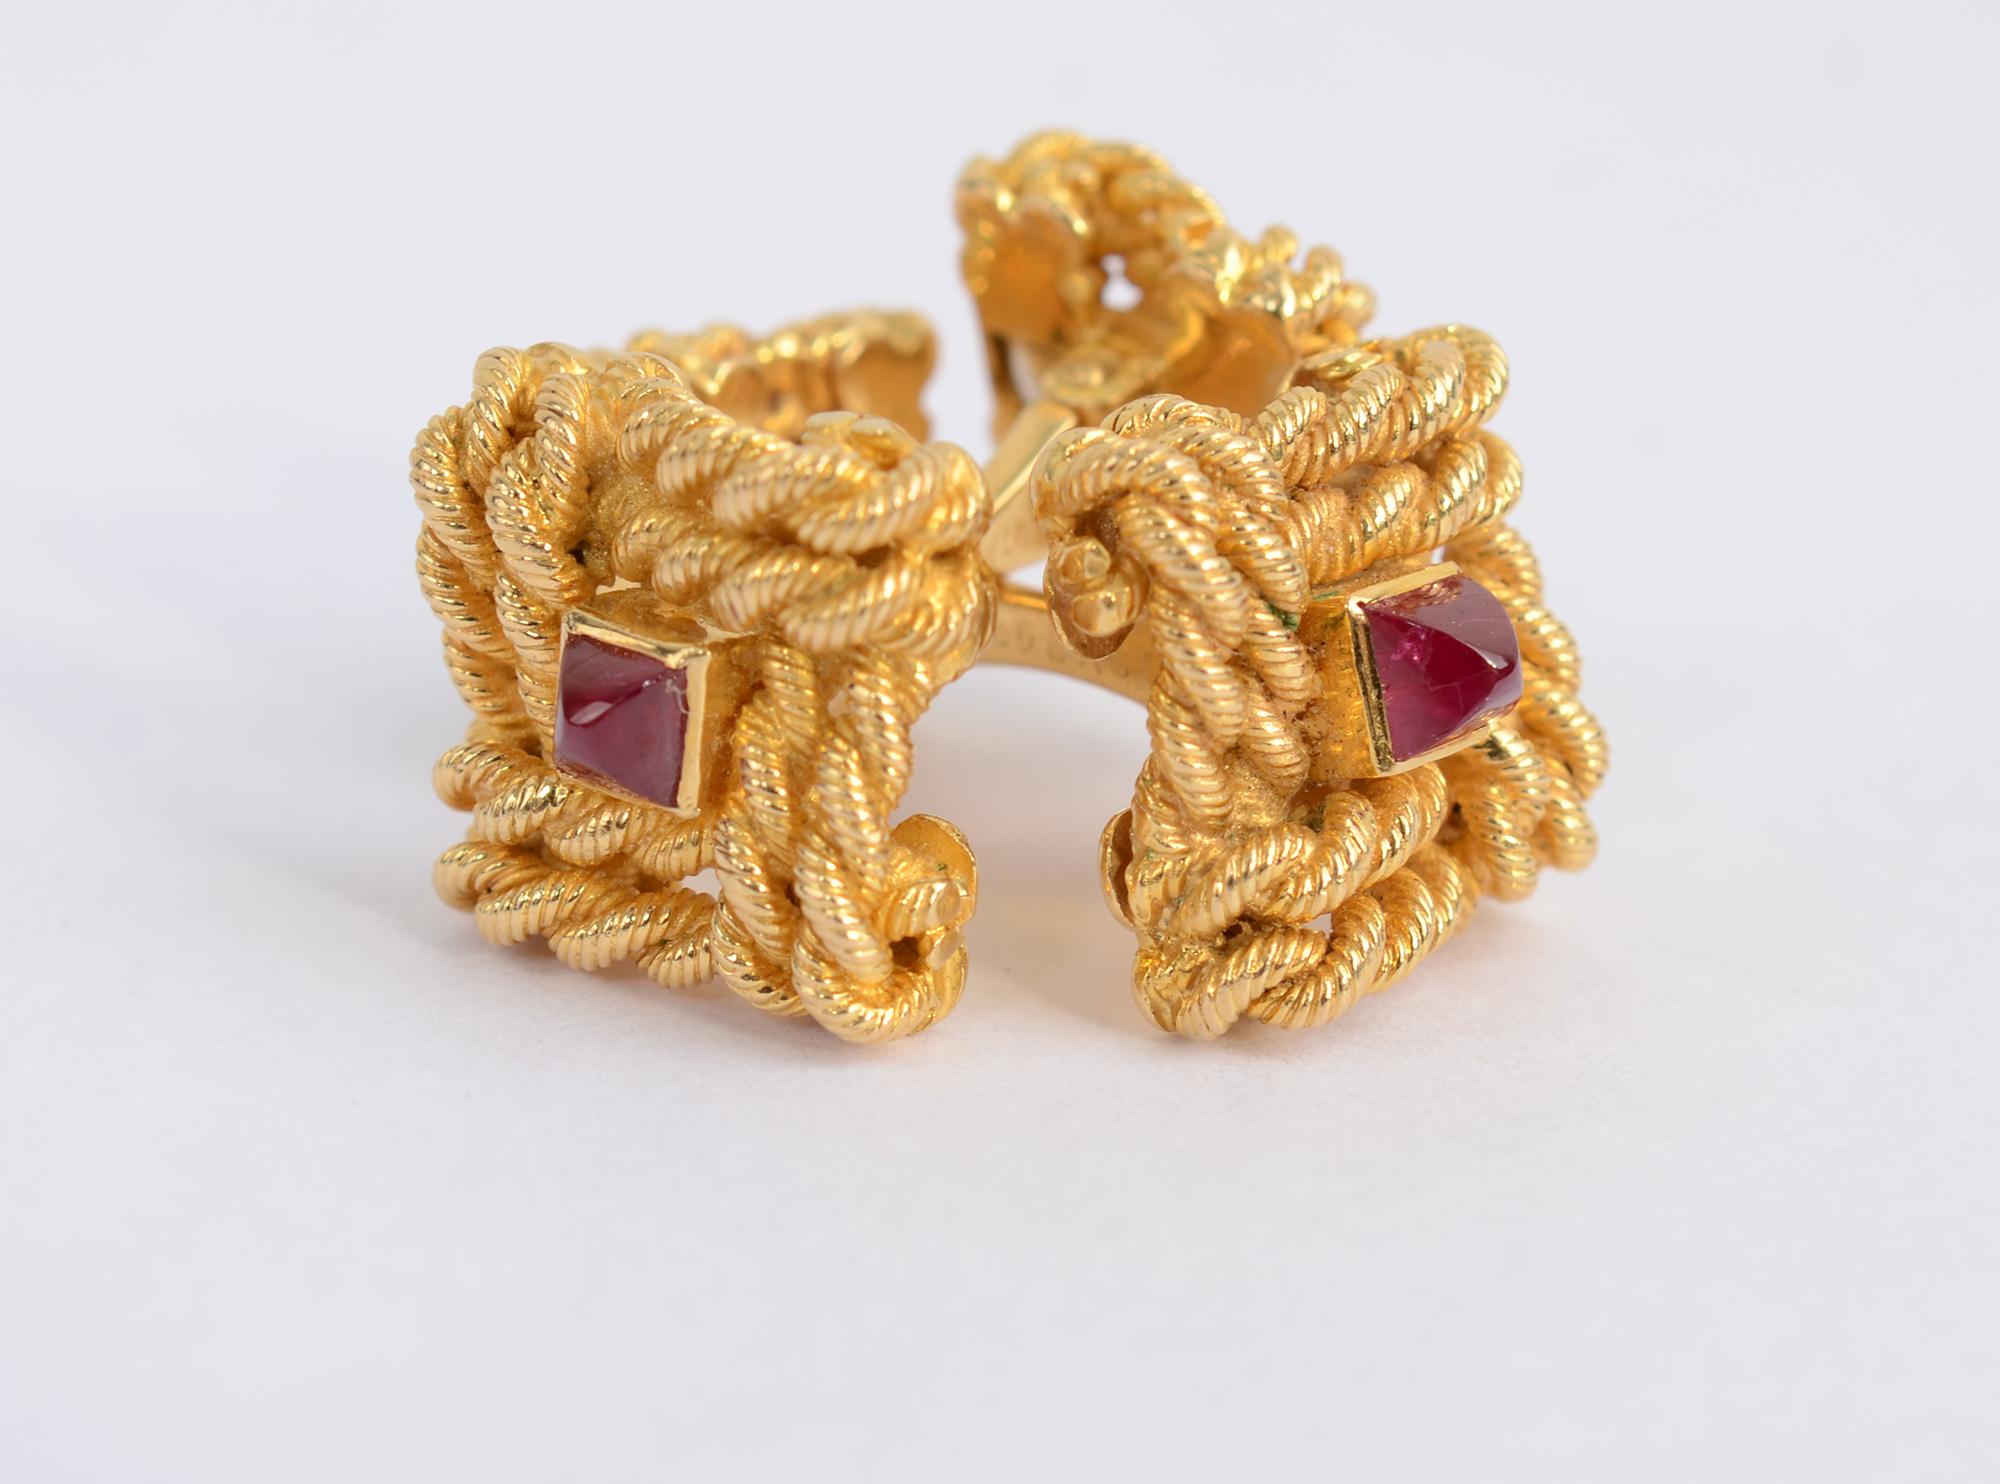 It is difficult to imagine cufflinks more elegant than this pair by Van Cleef and Arpels France.  Both ends are twisted gold roping centered with a ruby. The backs are hinged.
They measure 1 inch in length. The larger square is 5/8